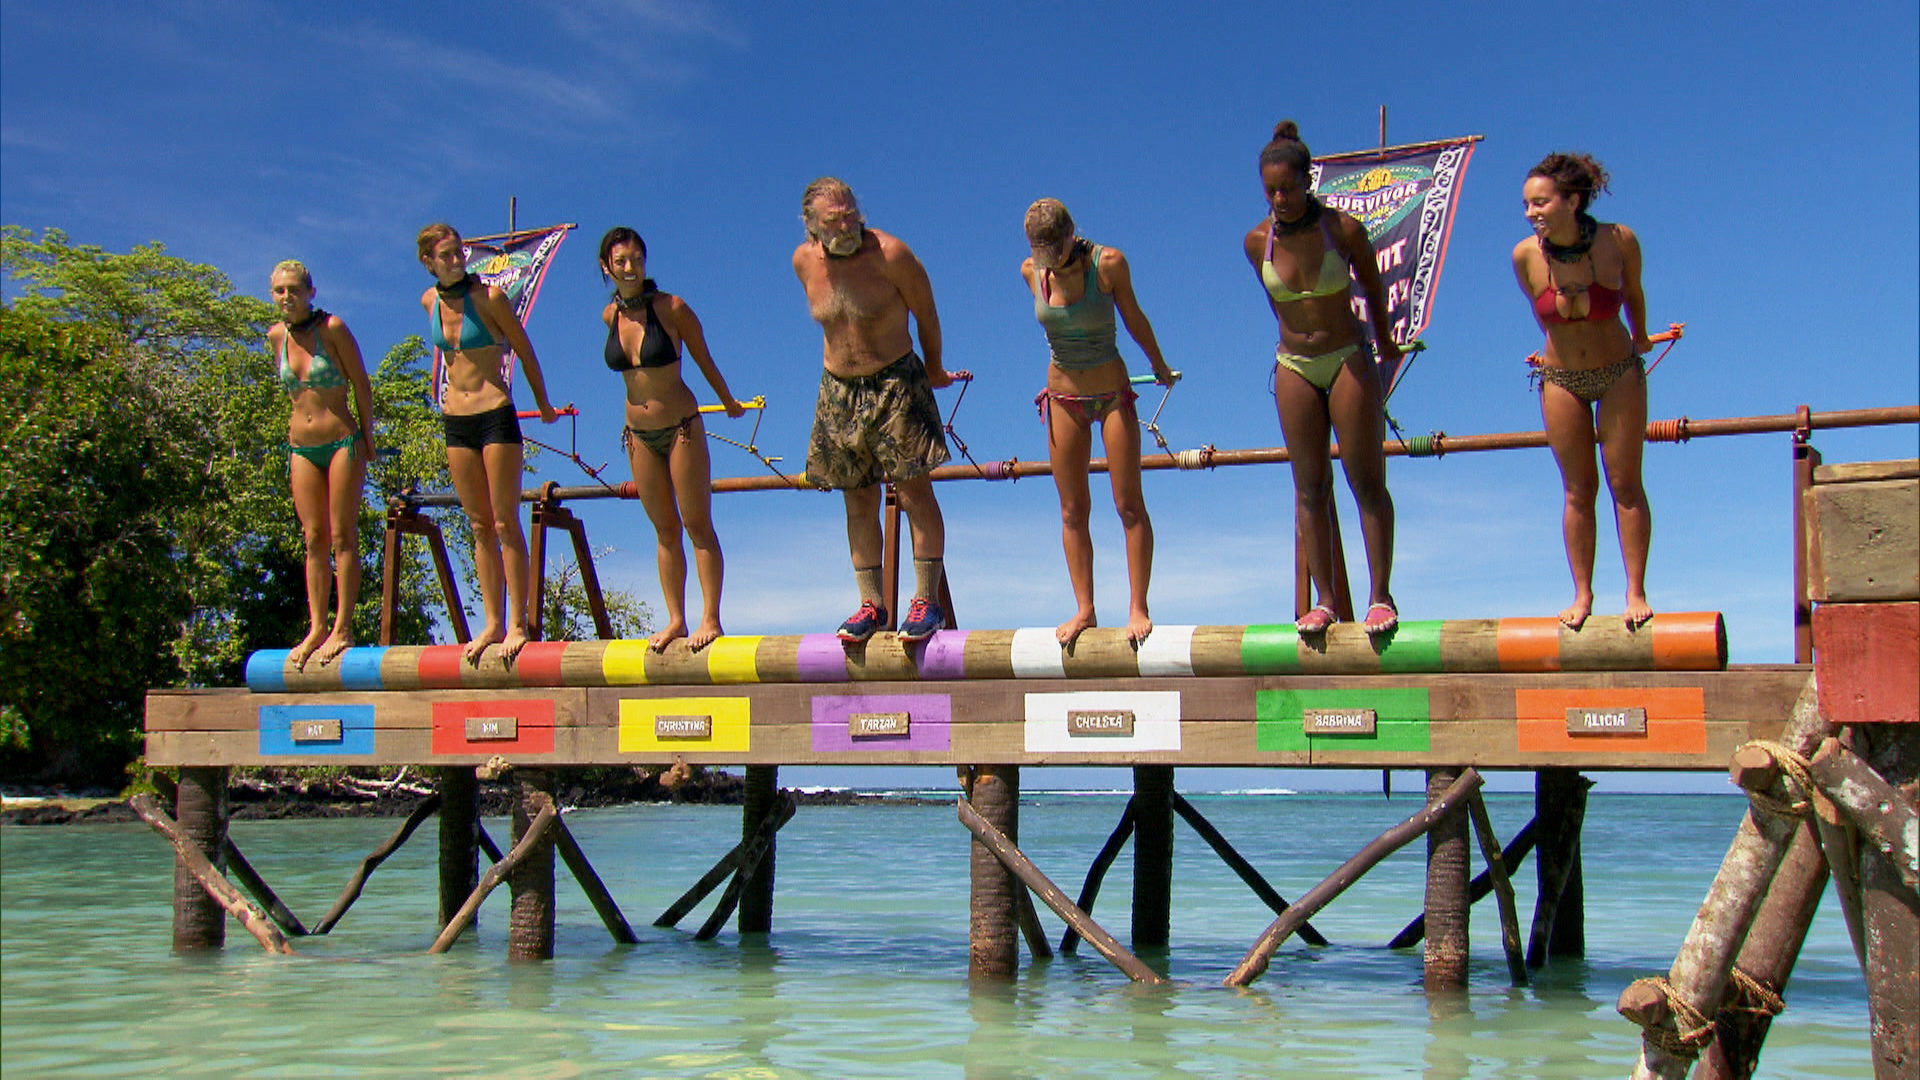 Watch Survivor Season 24 Episode 12 It's Gonna Be Chaos Full show on